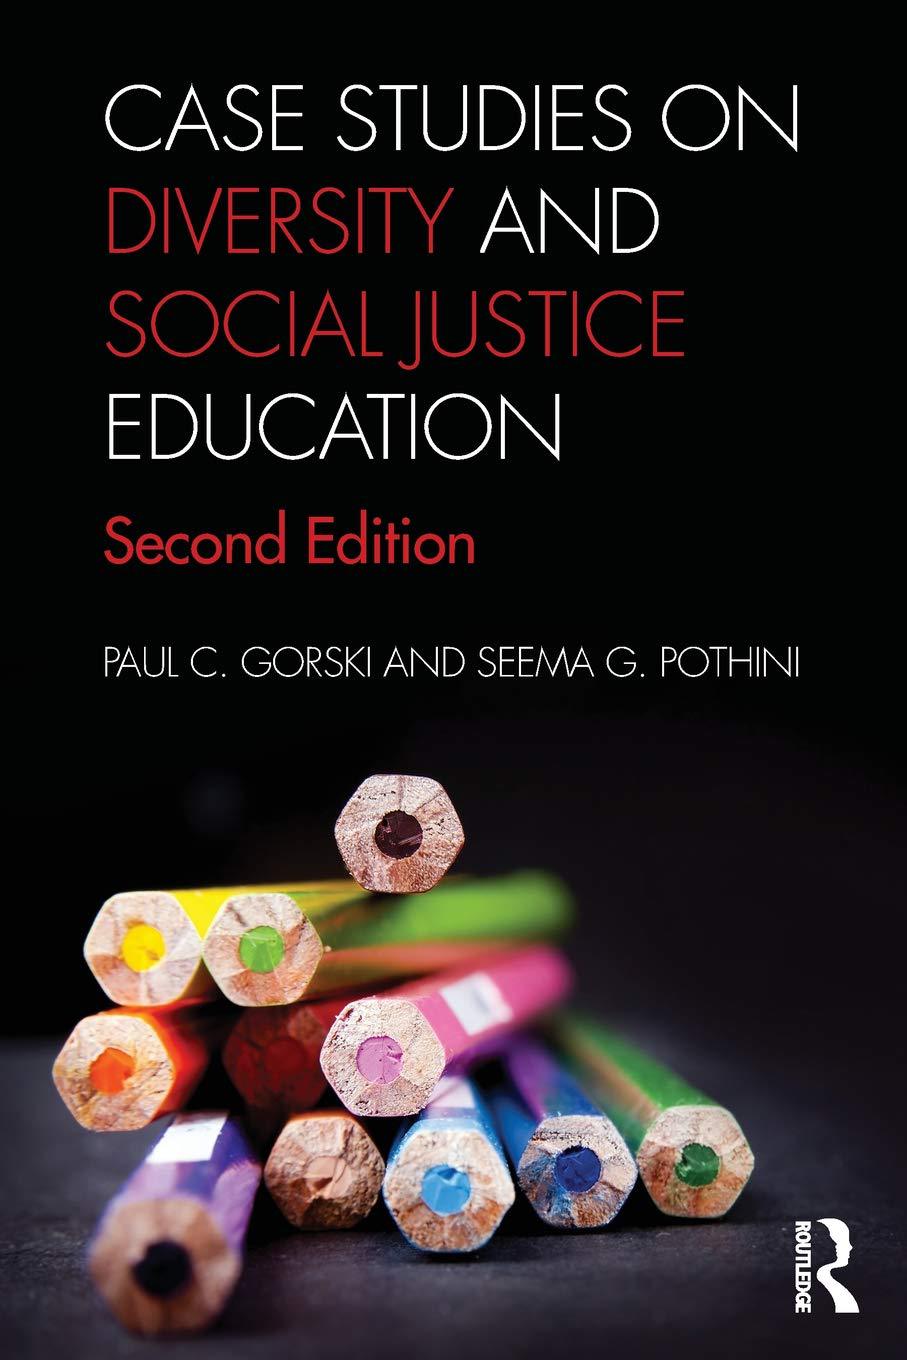 The cover image of Case Studies on Diversity and Social Justice Education (Second Edition), by Paul Gorski and Seema Pothini, which features a variety of nuanced descriptions of inequity and injustice in schools presented as narrative case studies.